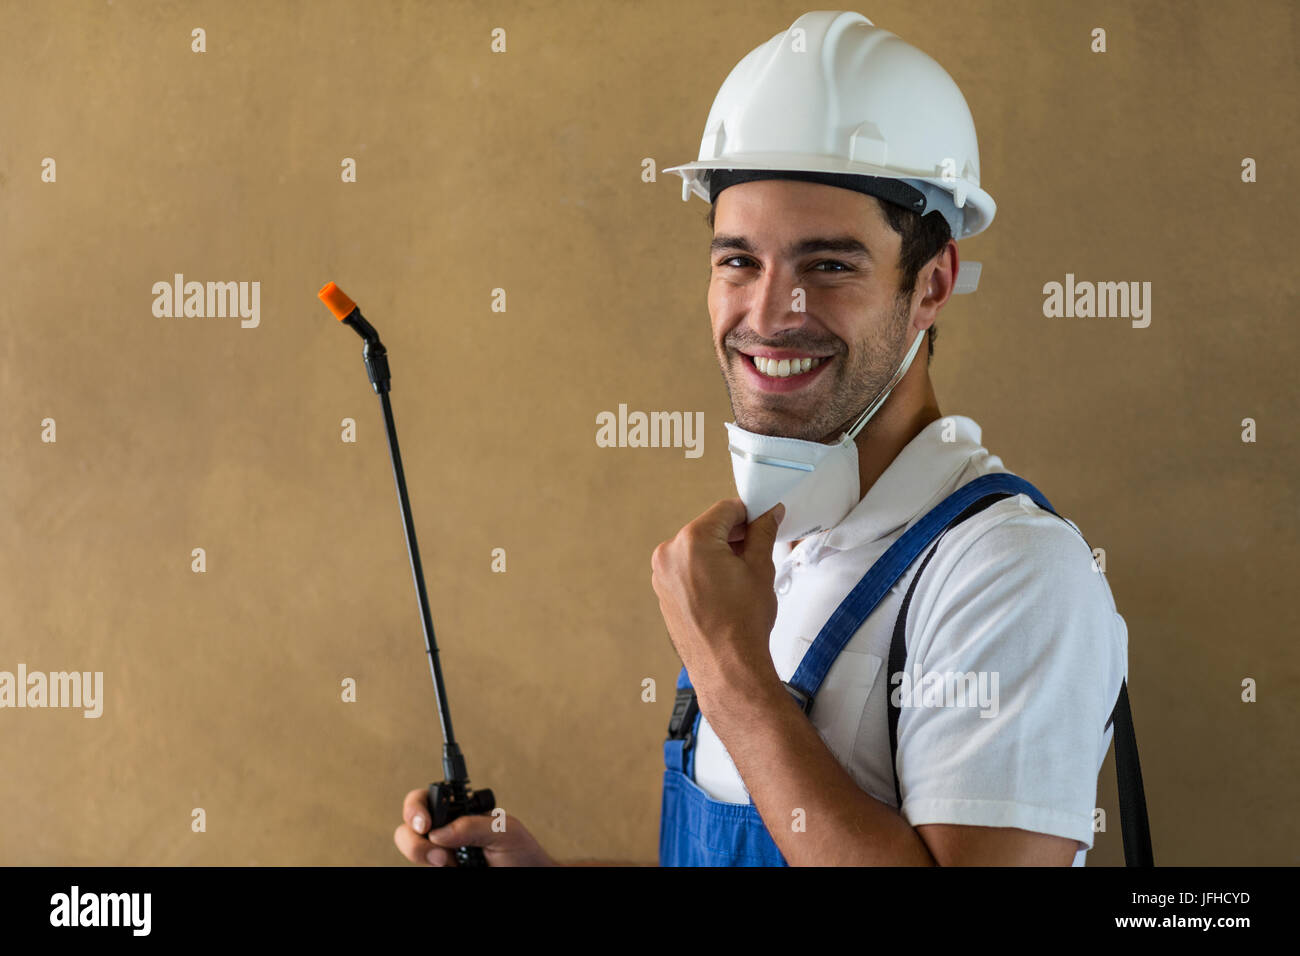 Portrait of happy manual worker with pesticide Stock Photo